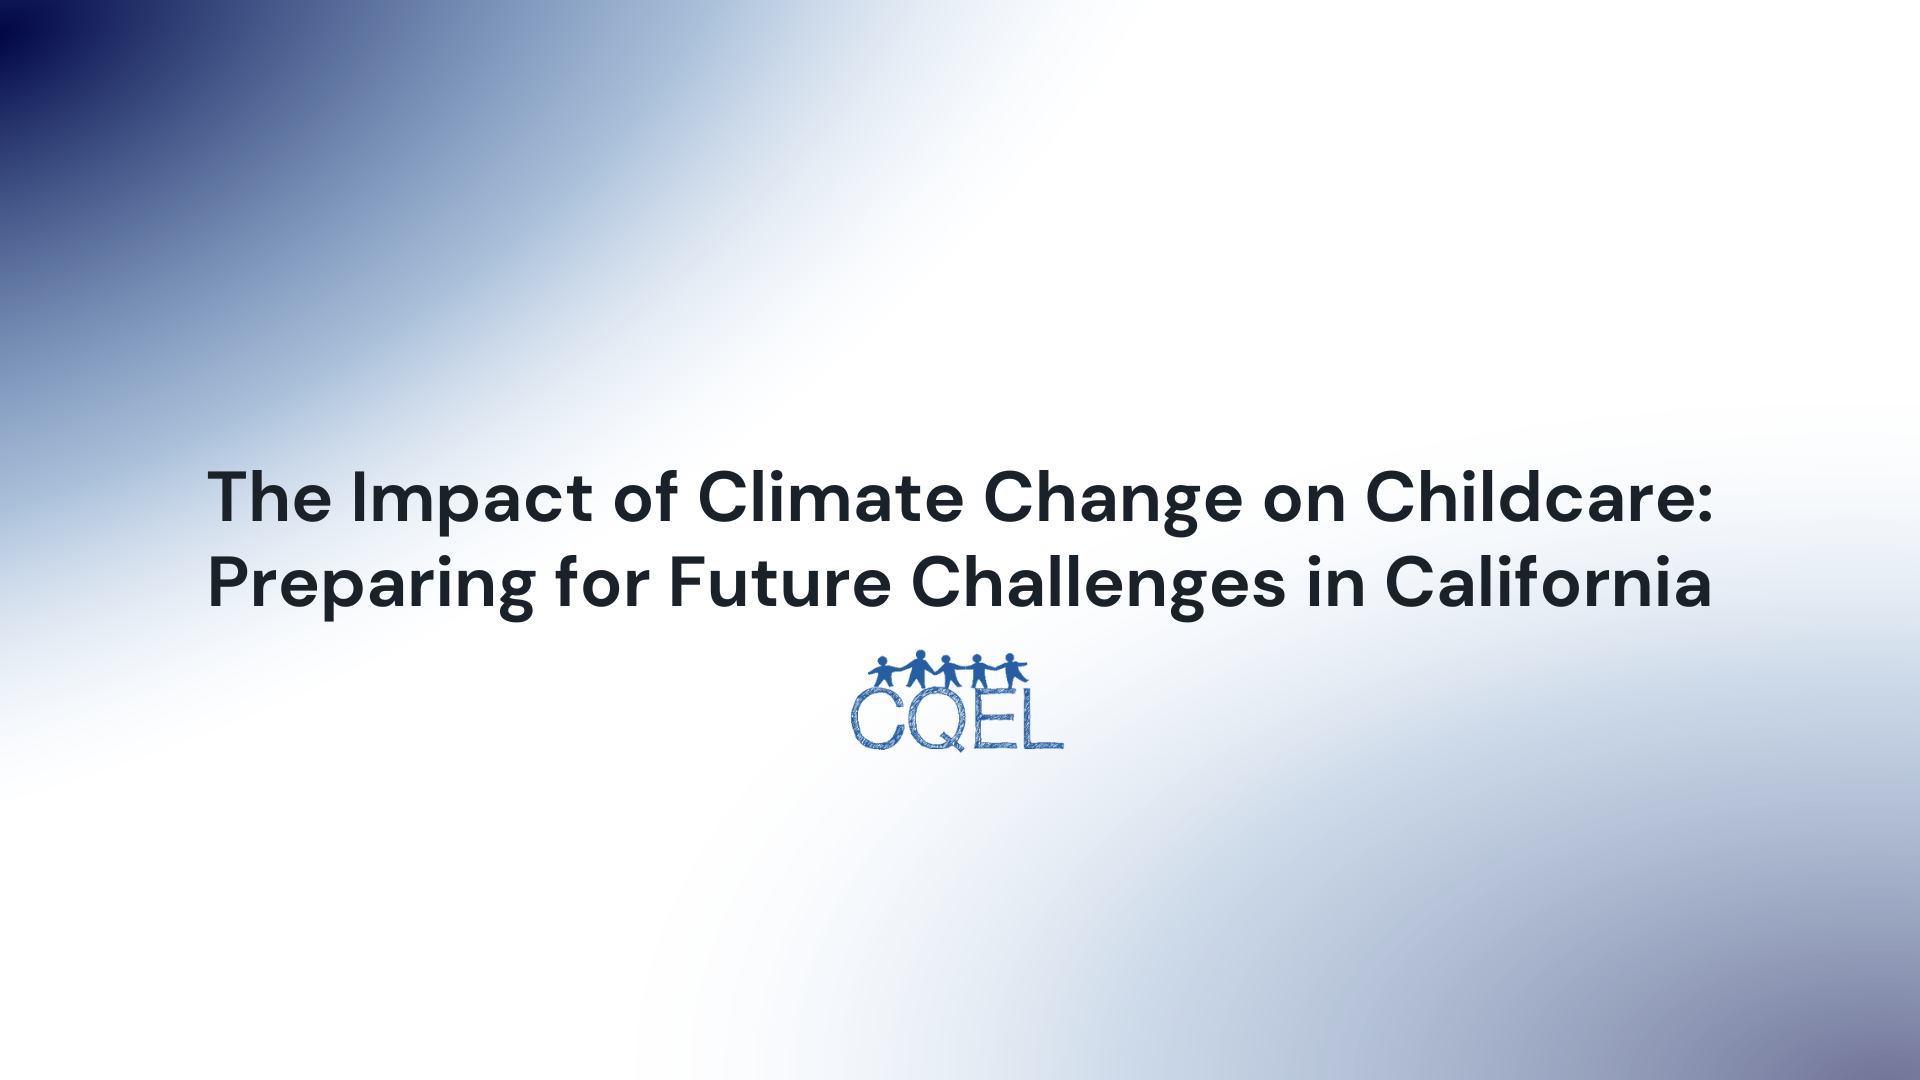 The Impact of Climate Change on Childcare: Preparing for Future Challenges in California